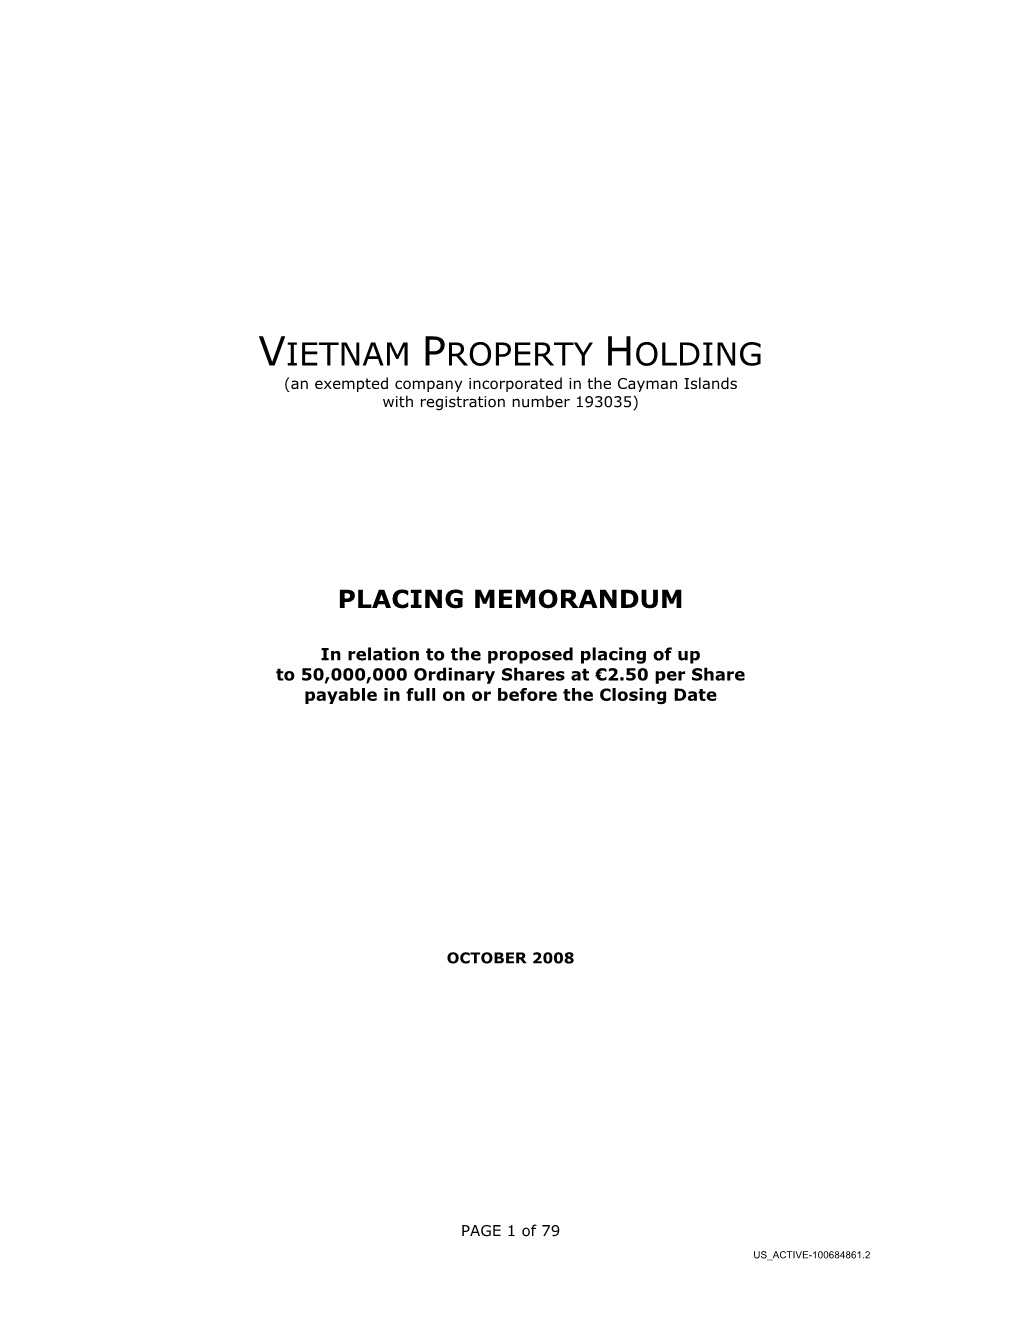 VIETNAM PROPERTY HOLDING (An Exempted Company Incorporated in the Cayman Islands with Registration Number 193035)